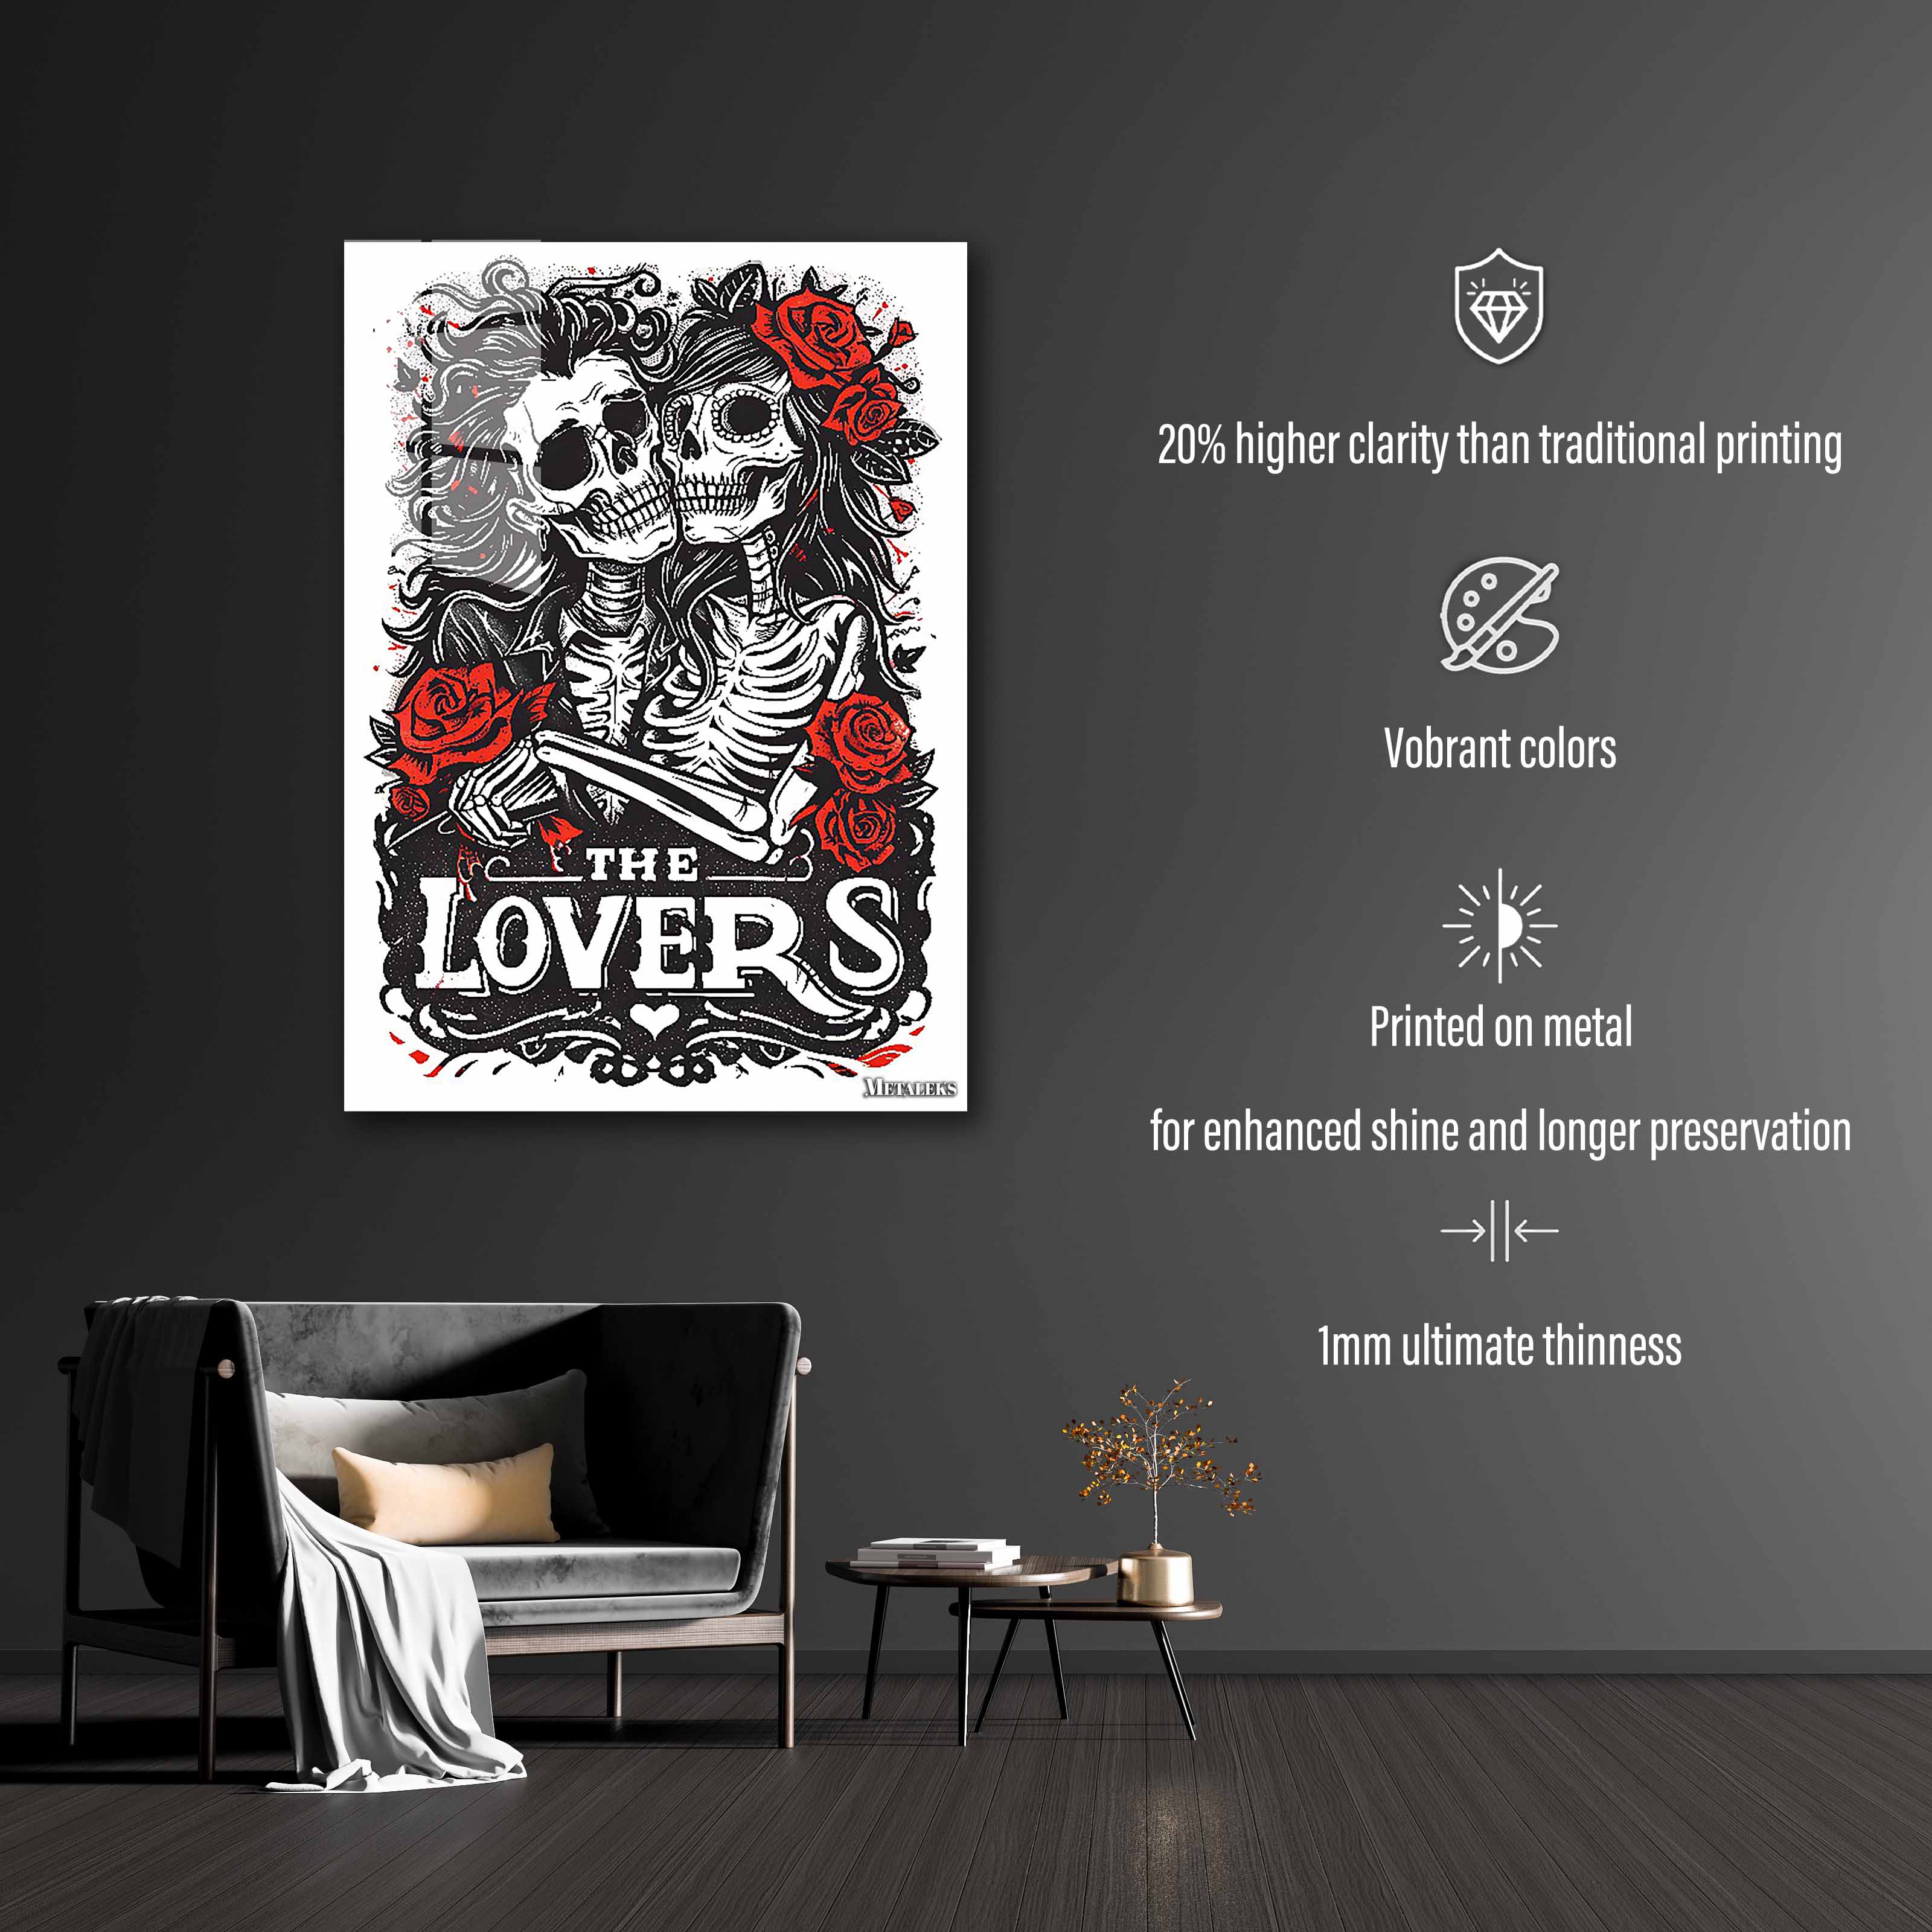 The Lovers Skeleton-designed by @Paragy